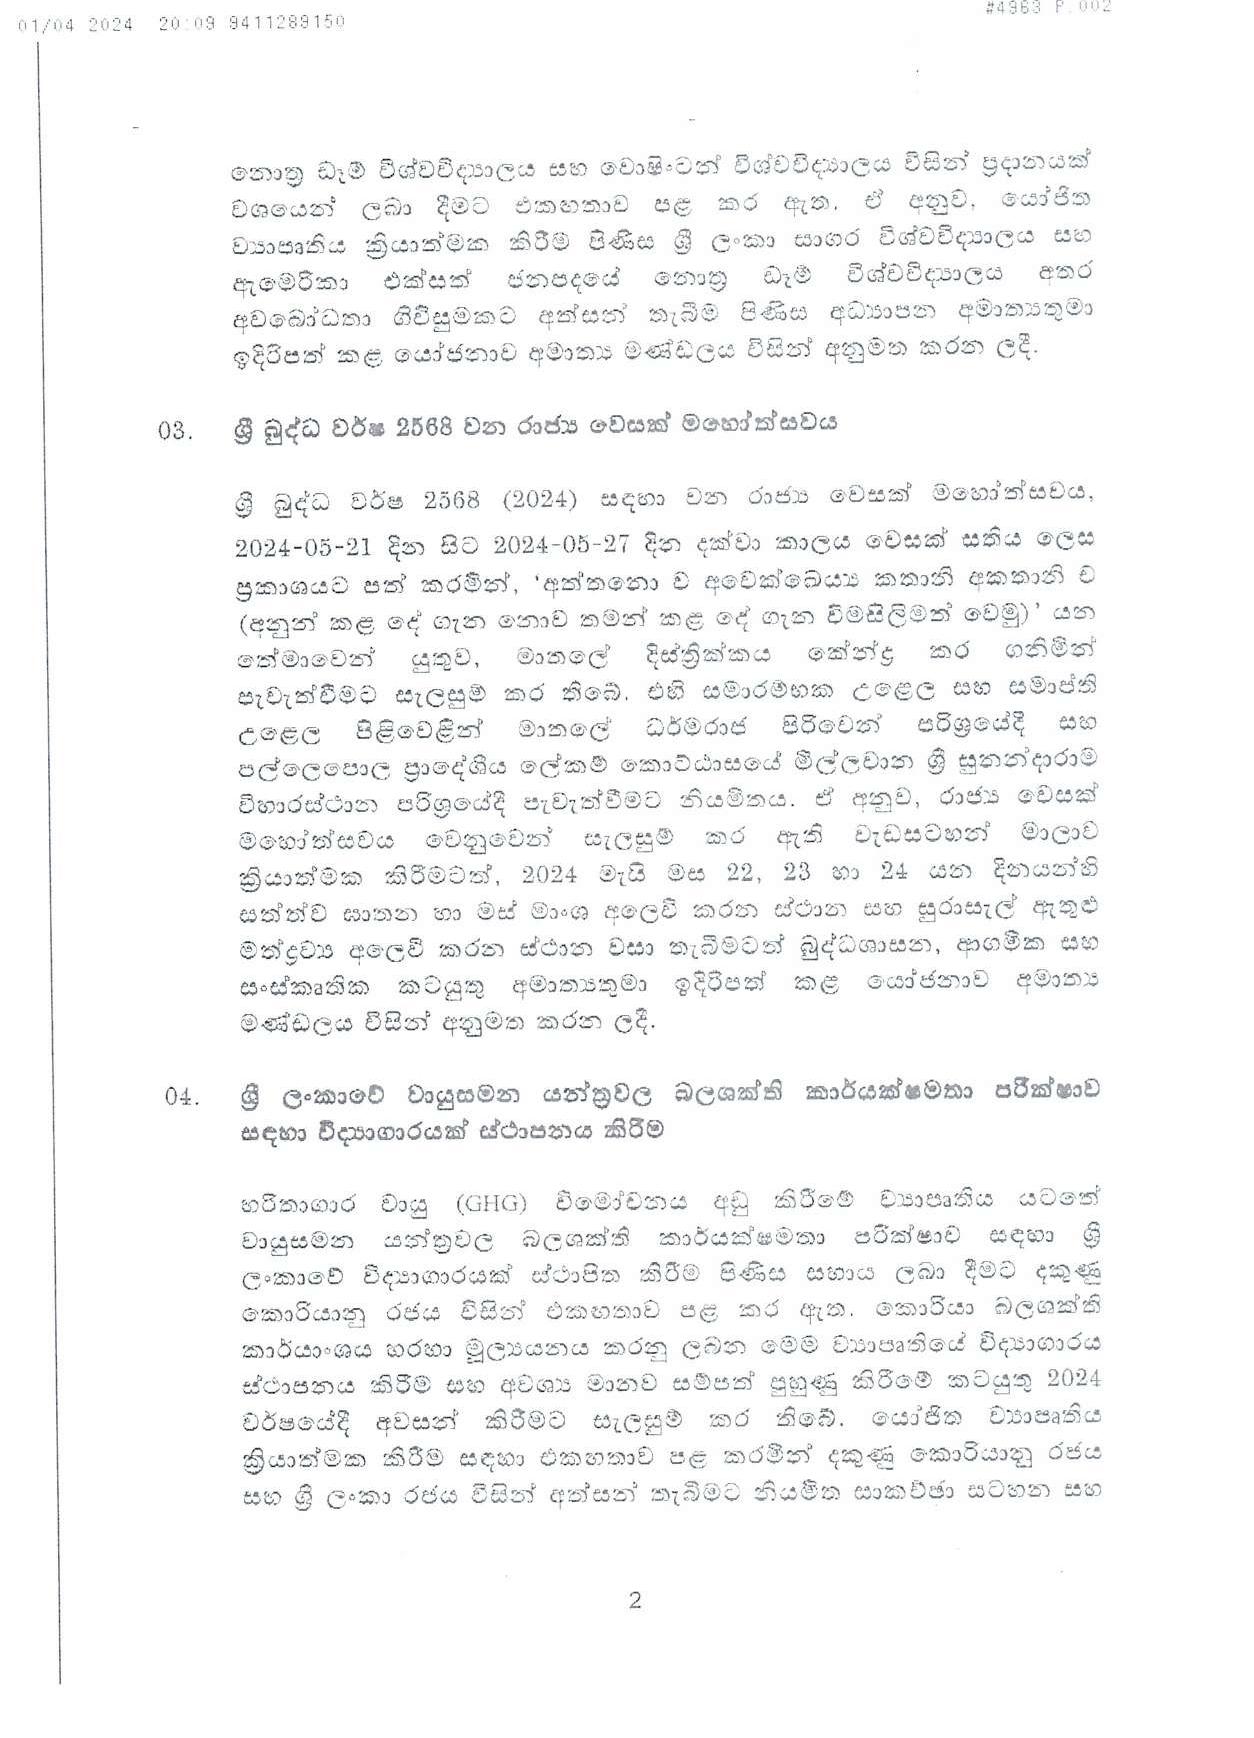 Cabinet Decisions on 01.04.2024 compressed page 002